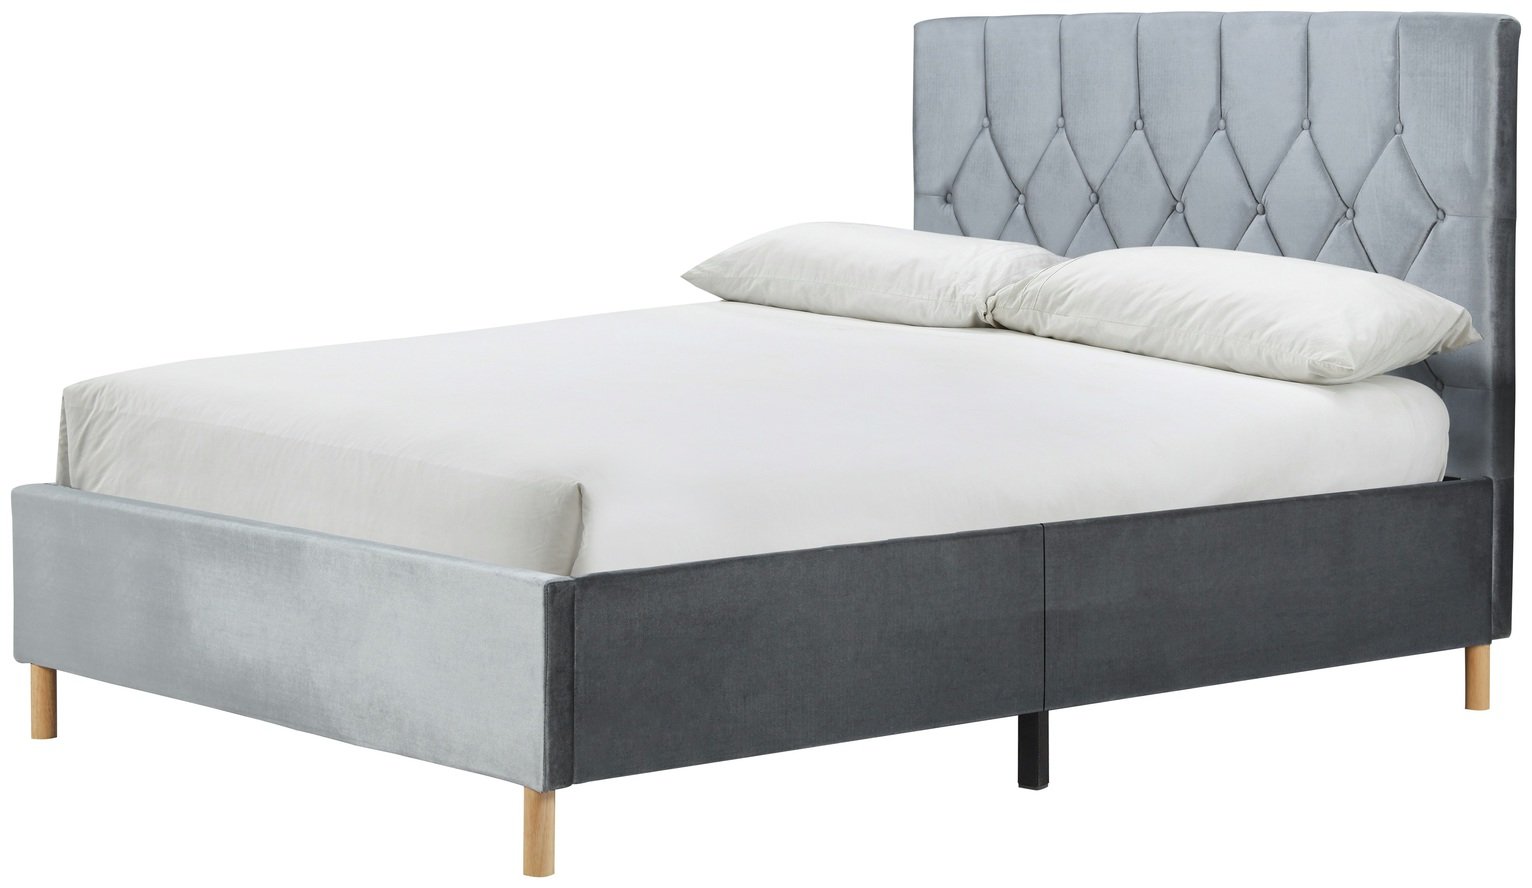 Birlea Loxley Small Double Fabric Bed Frame - Grey